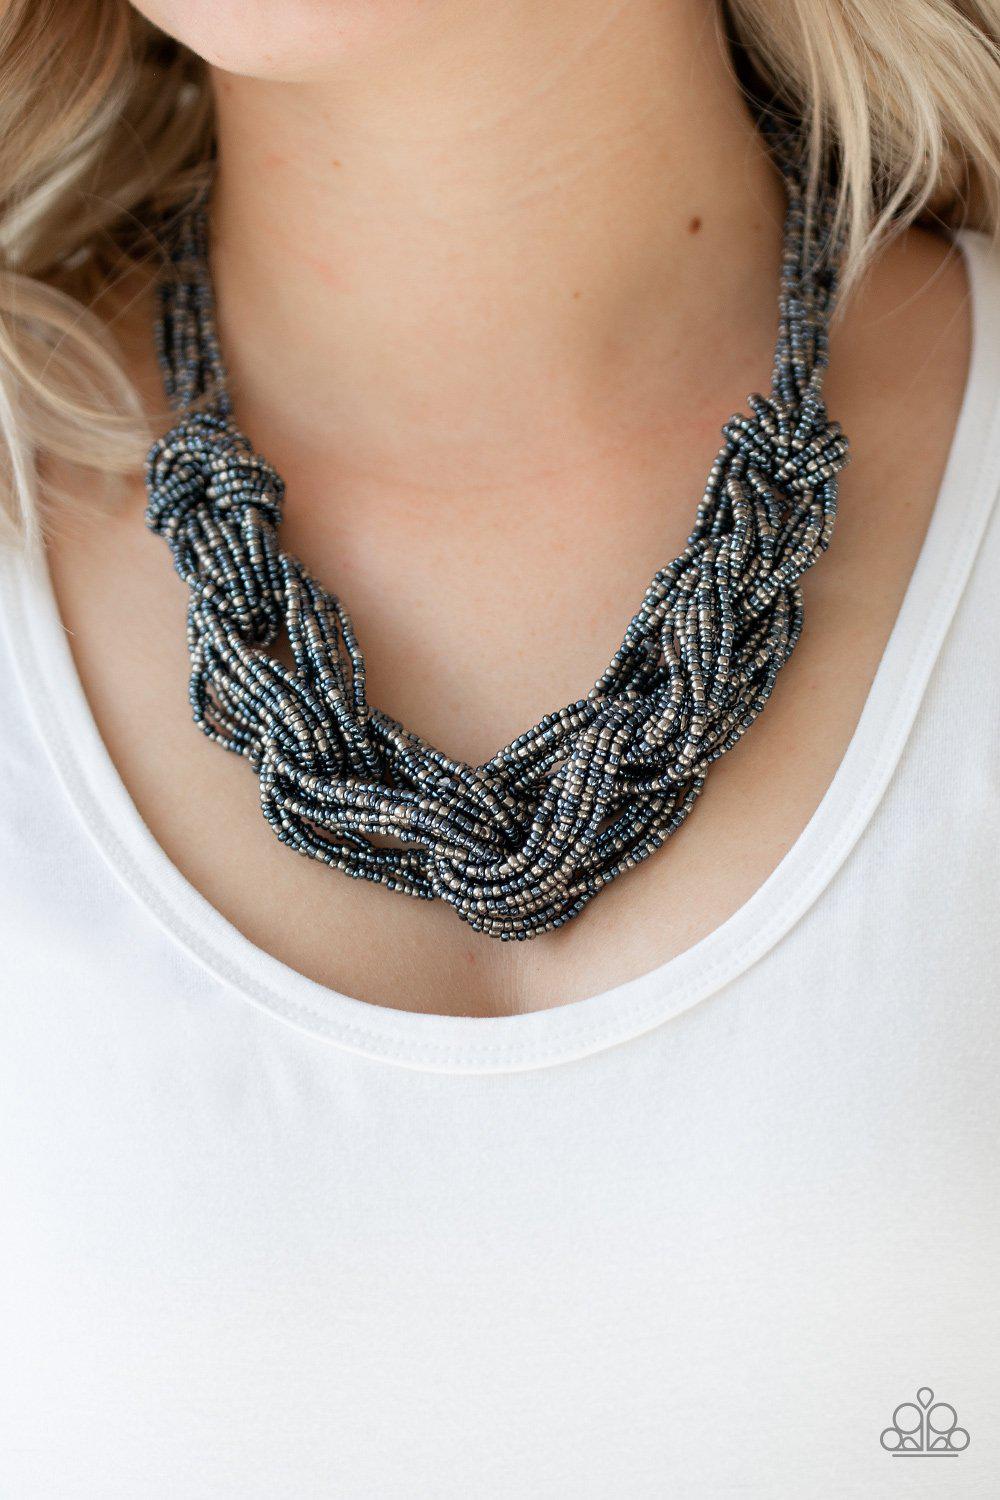 City Catwalk Blue and Gunmetal Seed bead Necklace - Paparazzi Accessories - model -CarasShop.com - $5 Jewelry by Cara Jewels